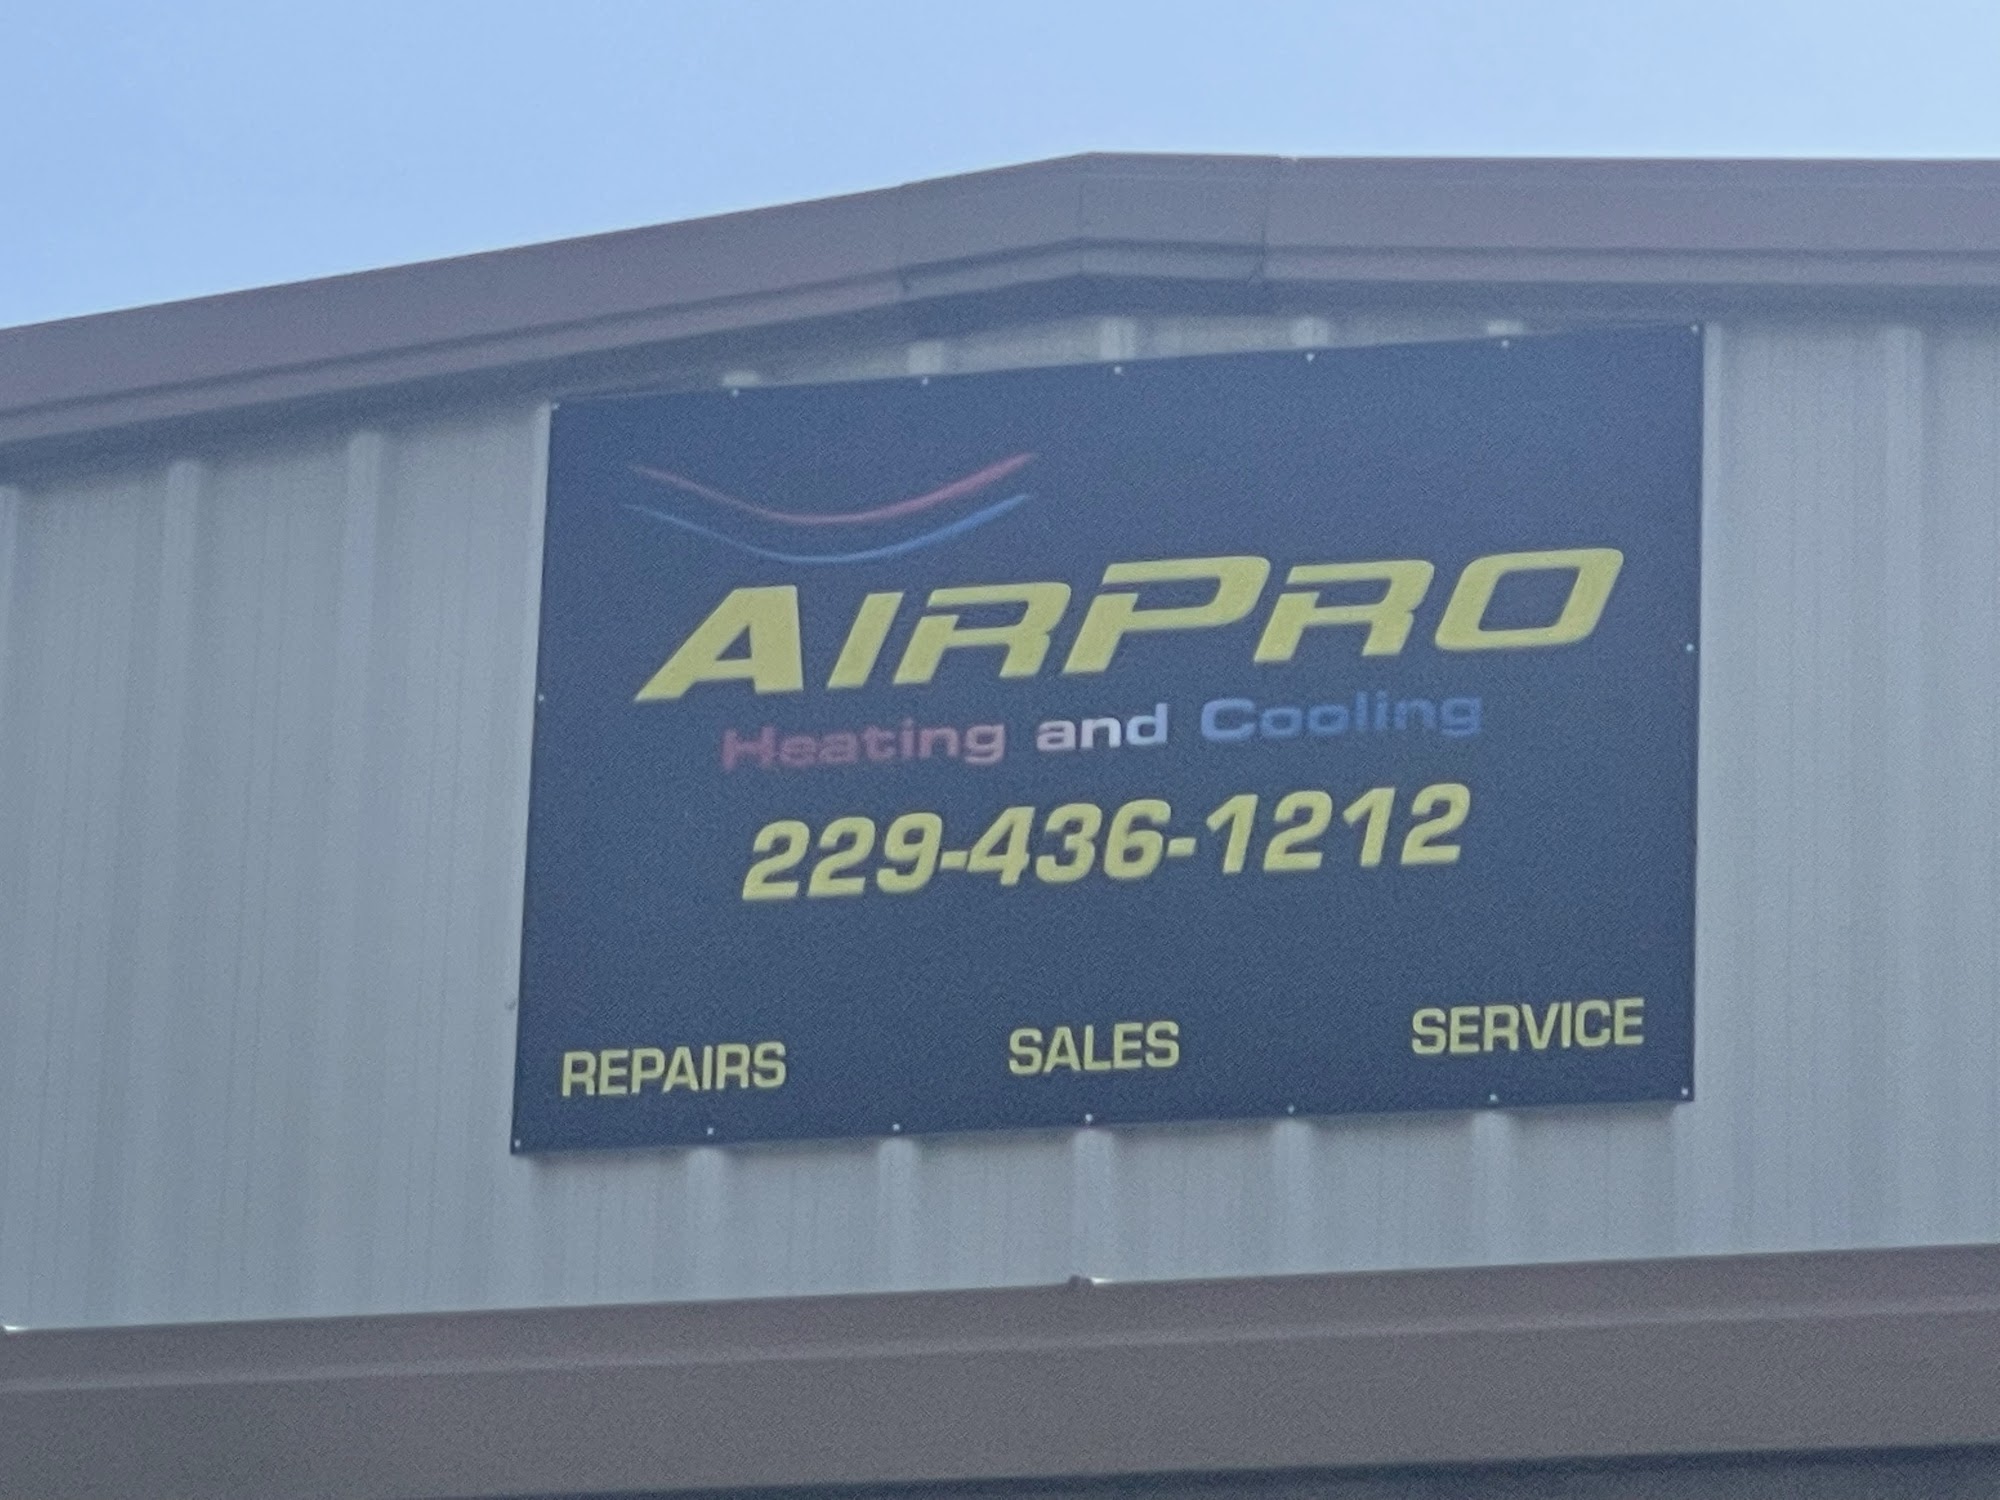 Air Pro Heating and Cooling 1275 US-82, Leesburg Georgia 31763